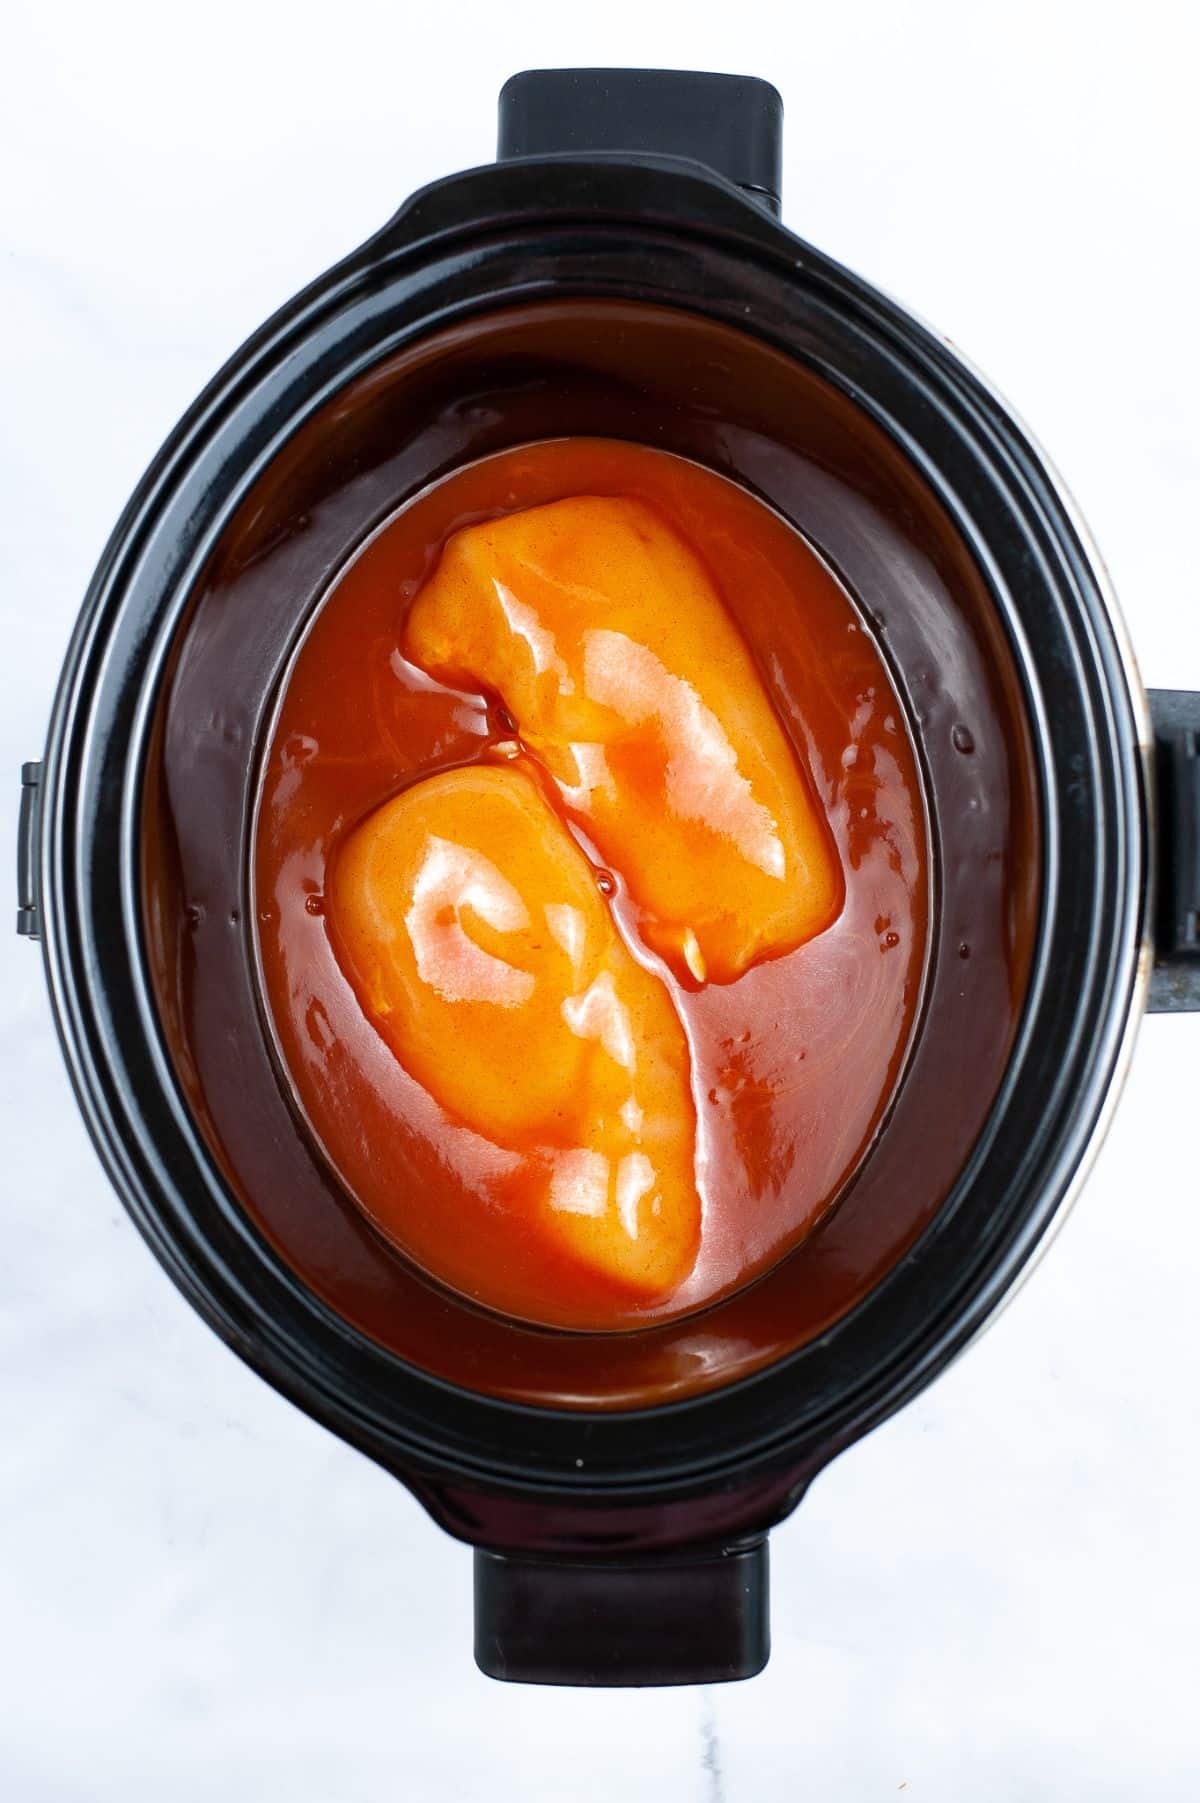 Chicken breasts and enchilada sauce inside the crock pot.